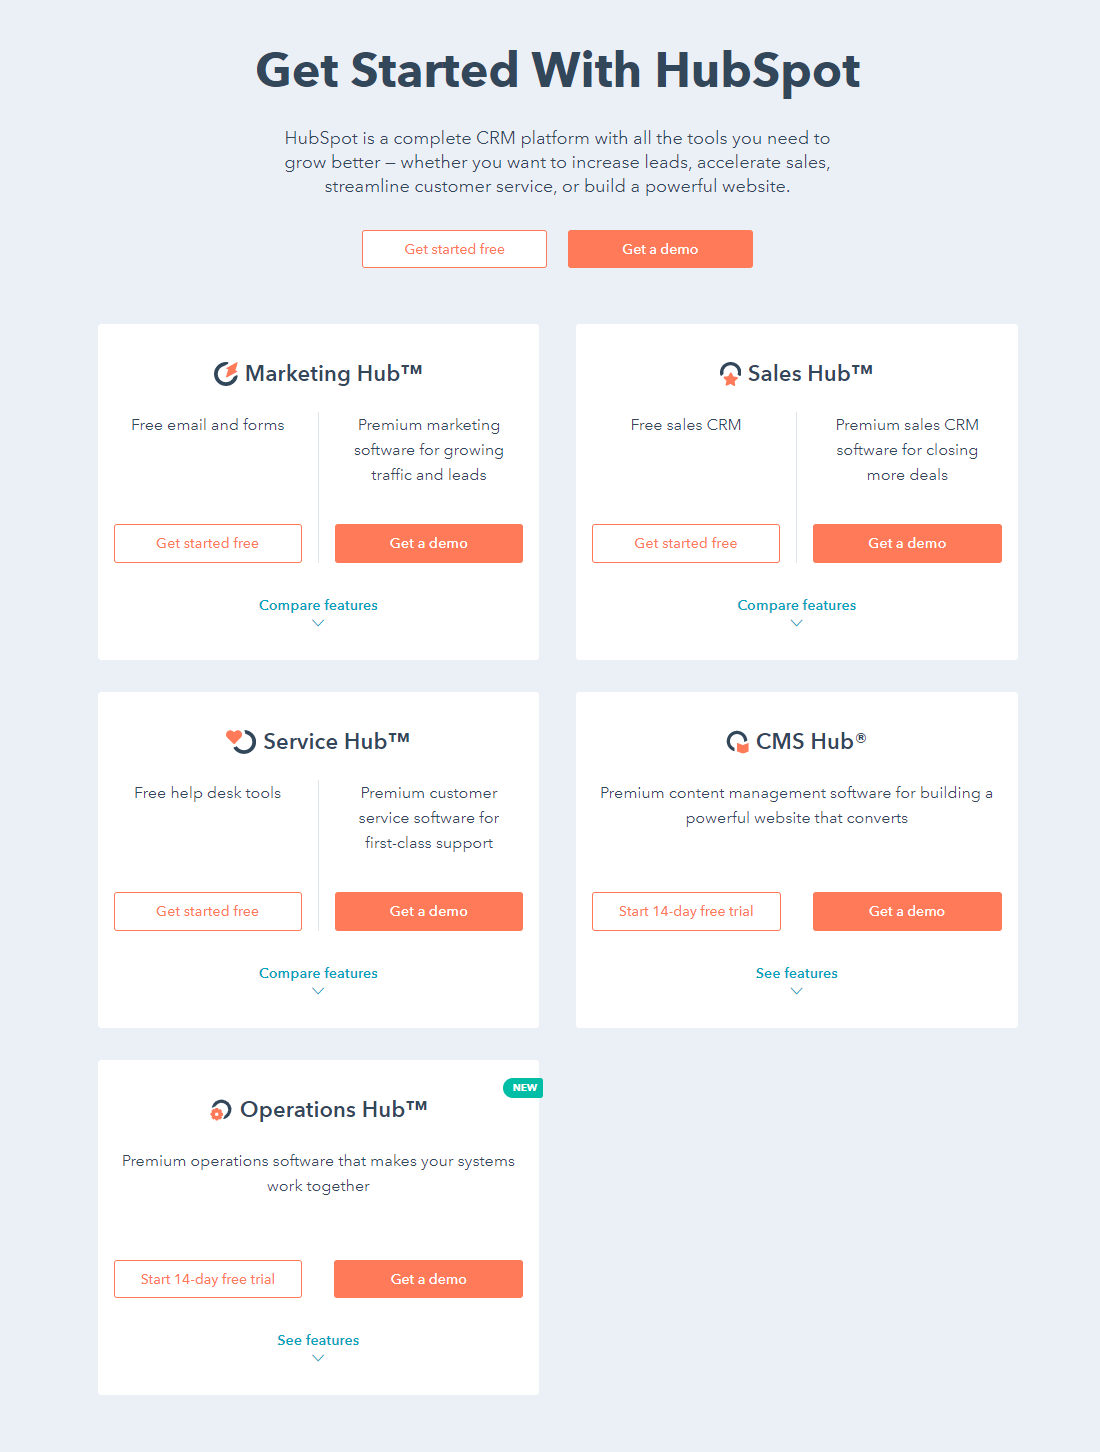 getting started with HubSpot pricing plan